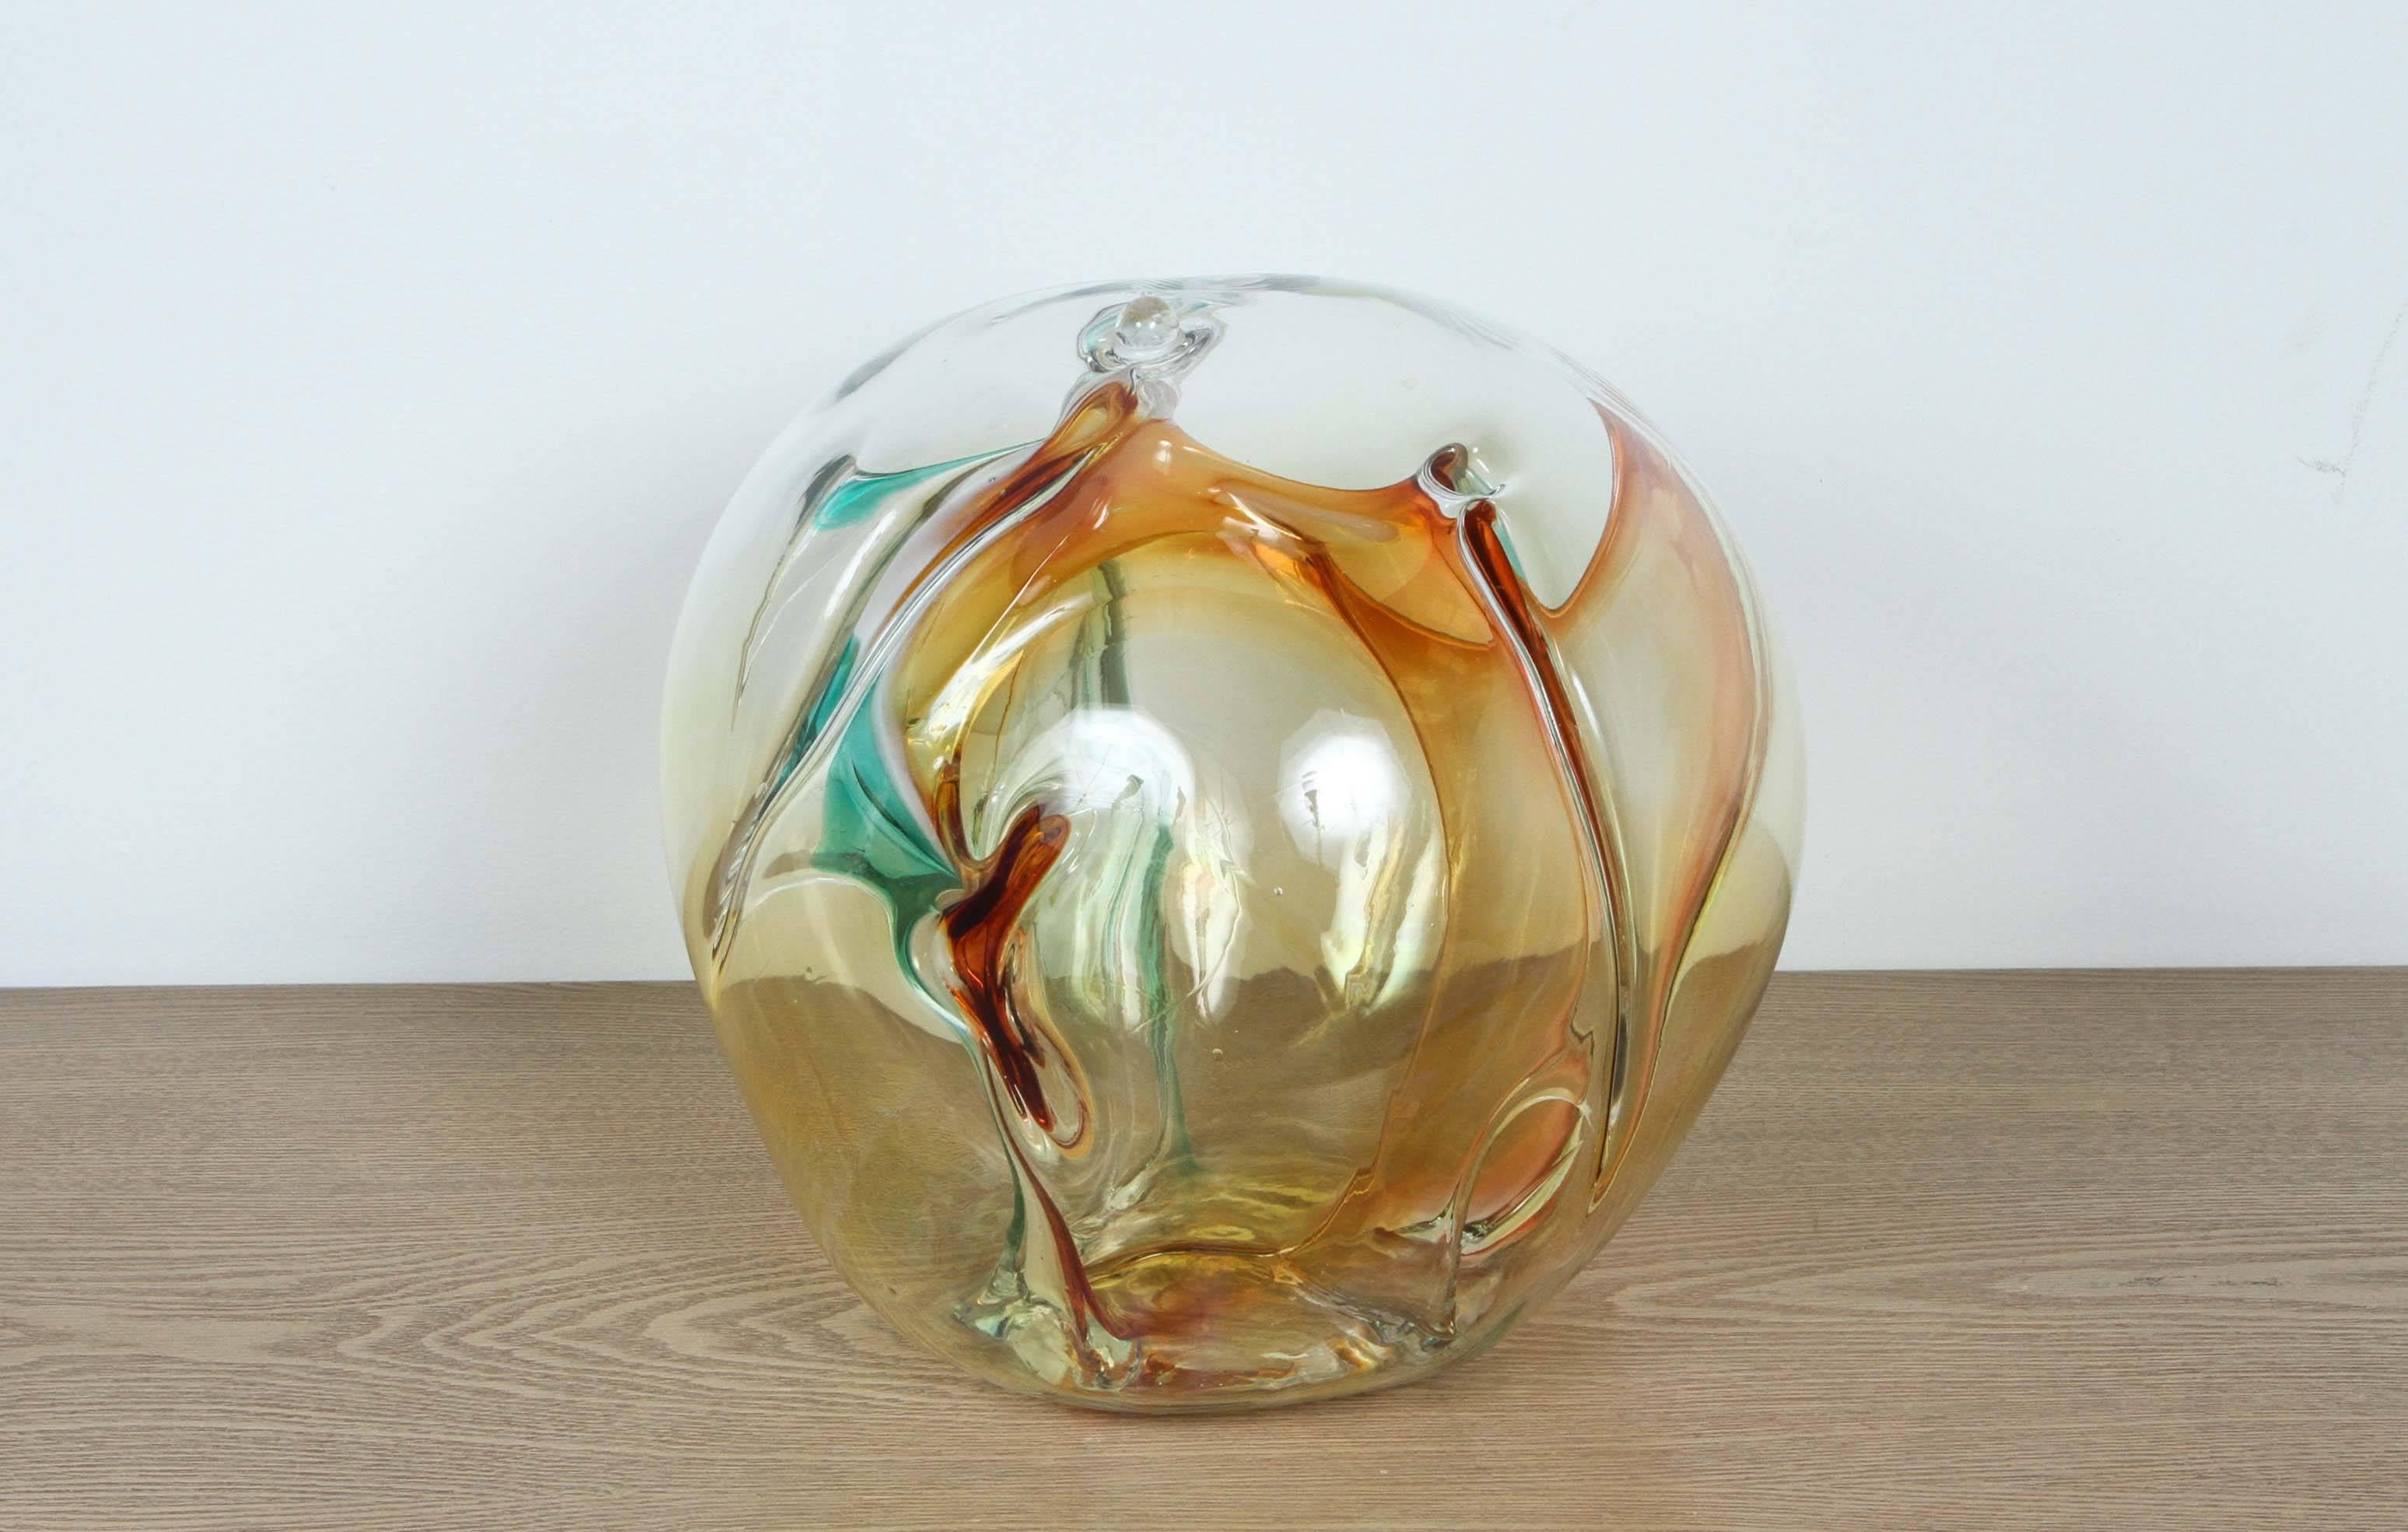 Beautiful handblown glass sculpture by Peter Bramhall.
The handblown glass has amber tones along with shades of aqua and white.
Signed and dated 1996.
  